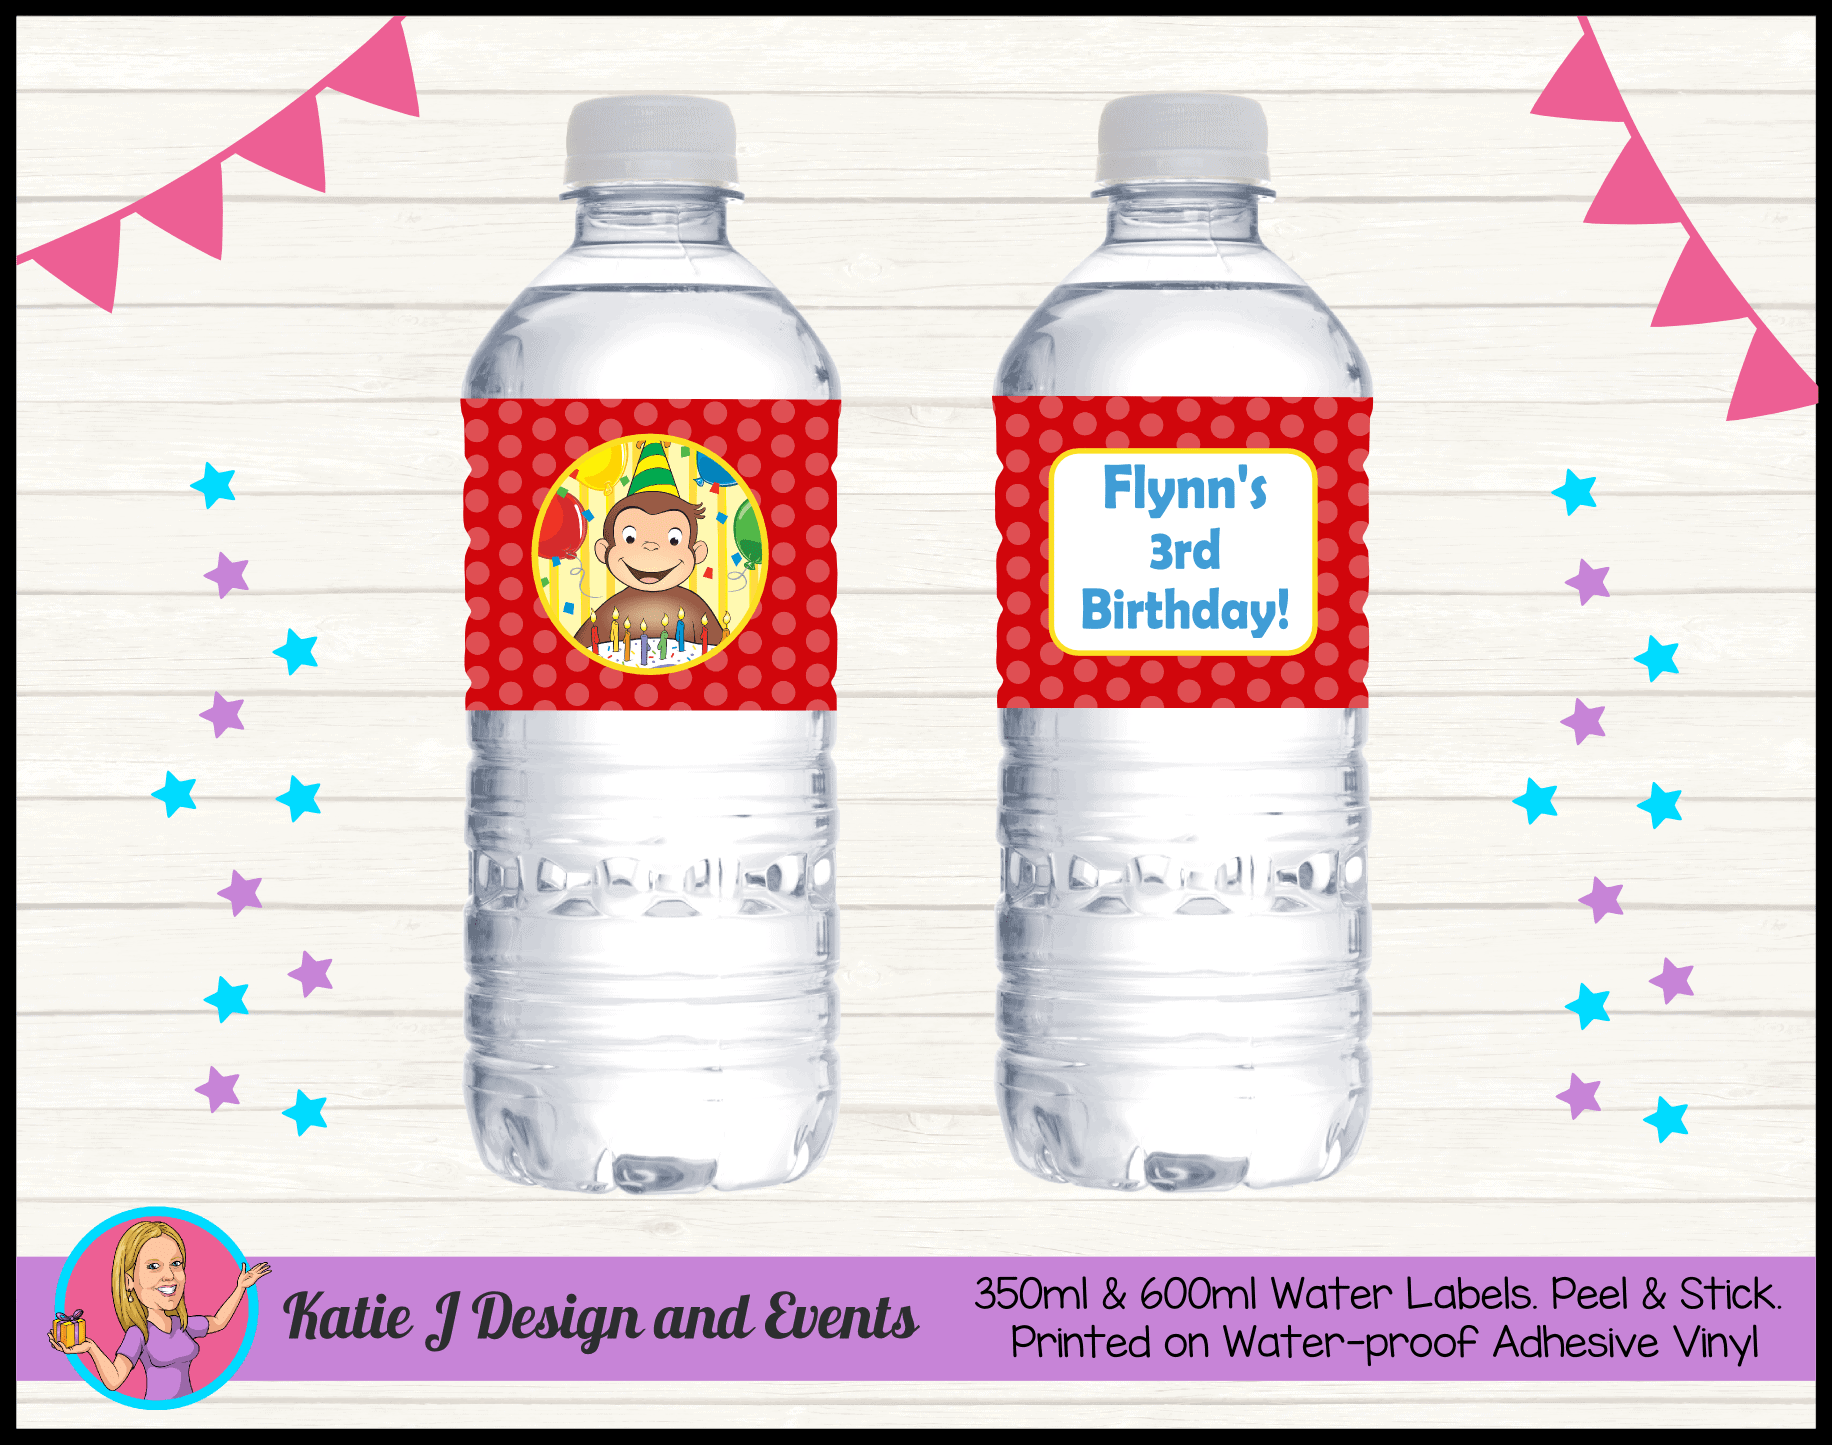 Personalised Curious George Birthday Party Decorations Katie J Design And Events - details about roblox personalized birthday party favors water bottle labels wrappers custom